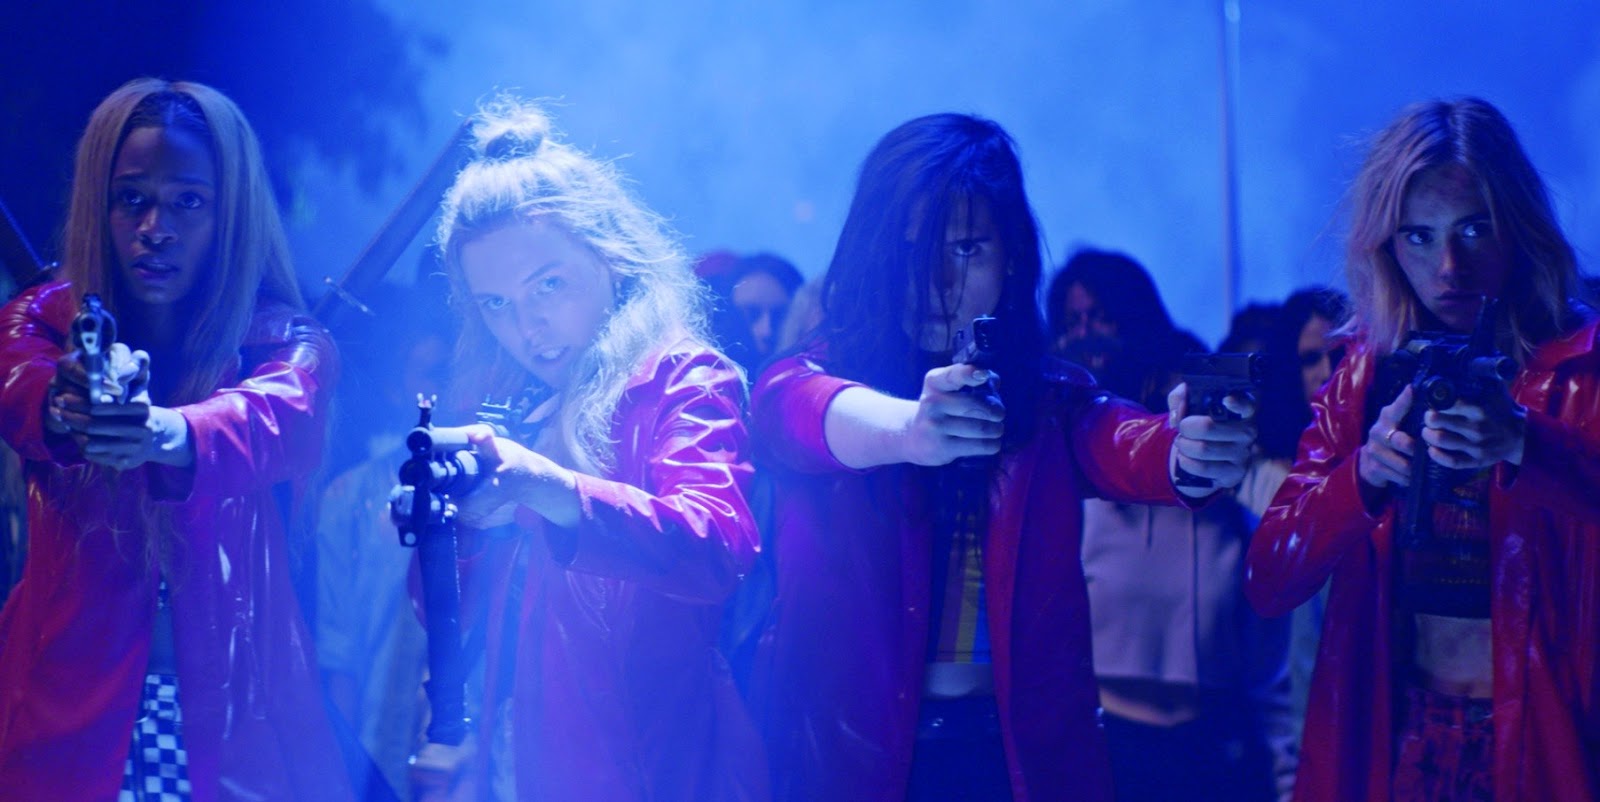 MOVIES: Assassination Nation - Review